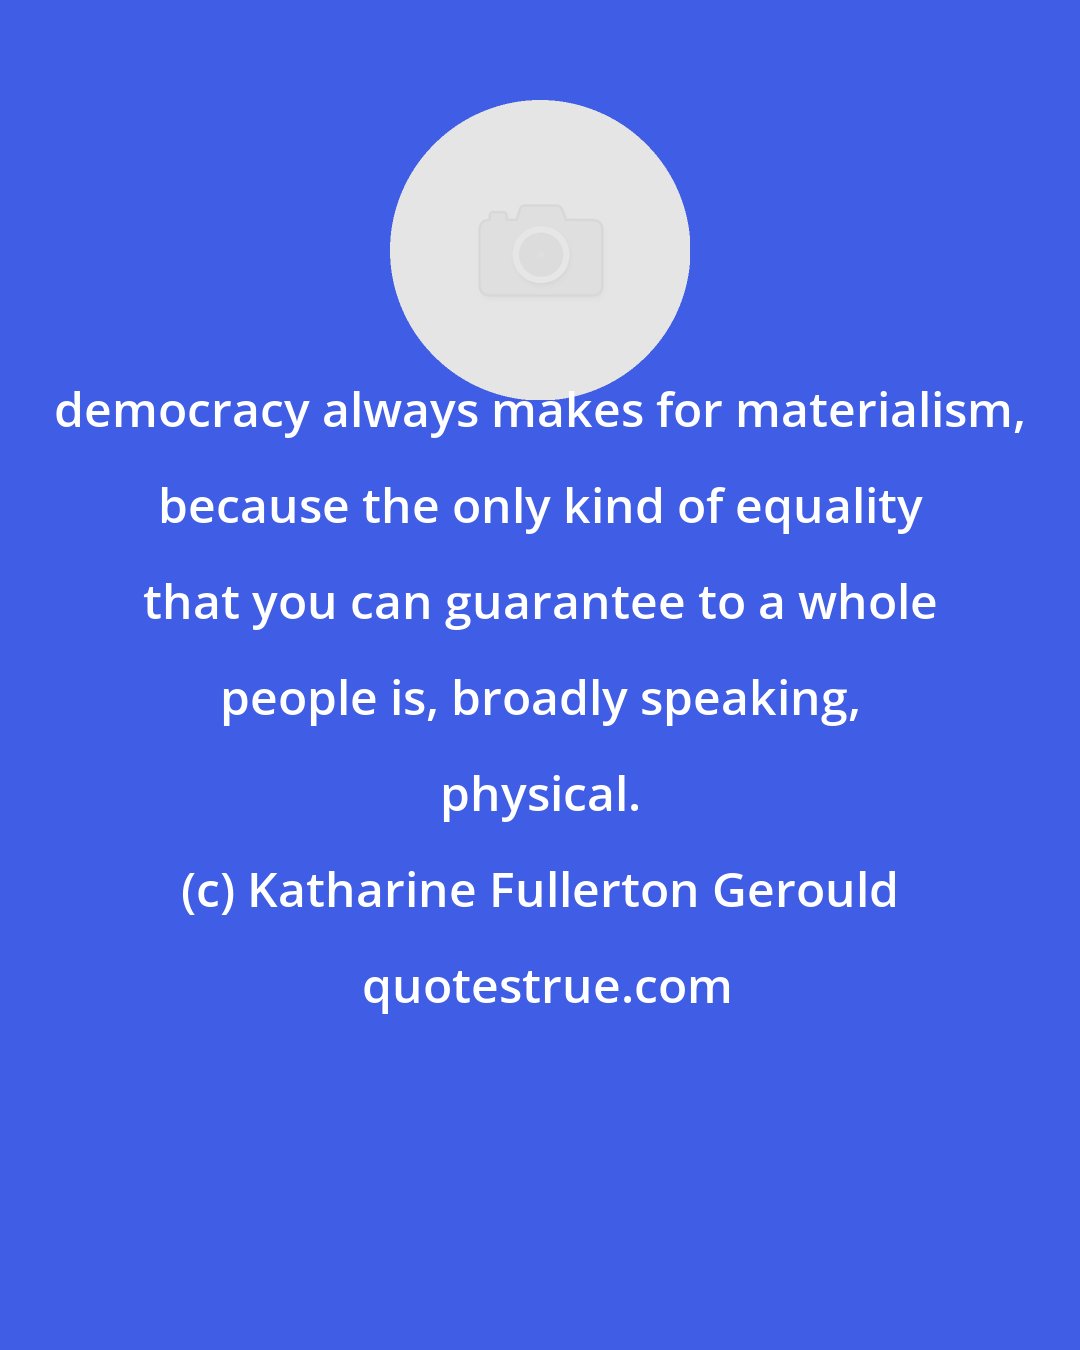 Katharine Fullerton Gerould: democracy always makes for materialism, because the only kind of equality that you can guarantee to a whole people is, broadly speaking, physical.